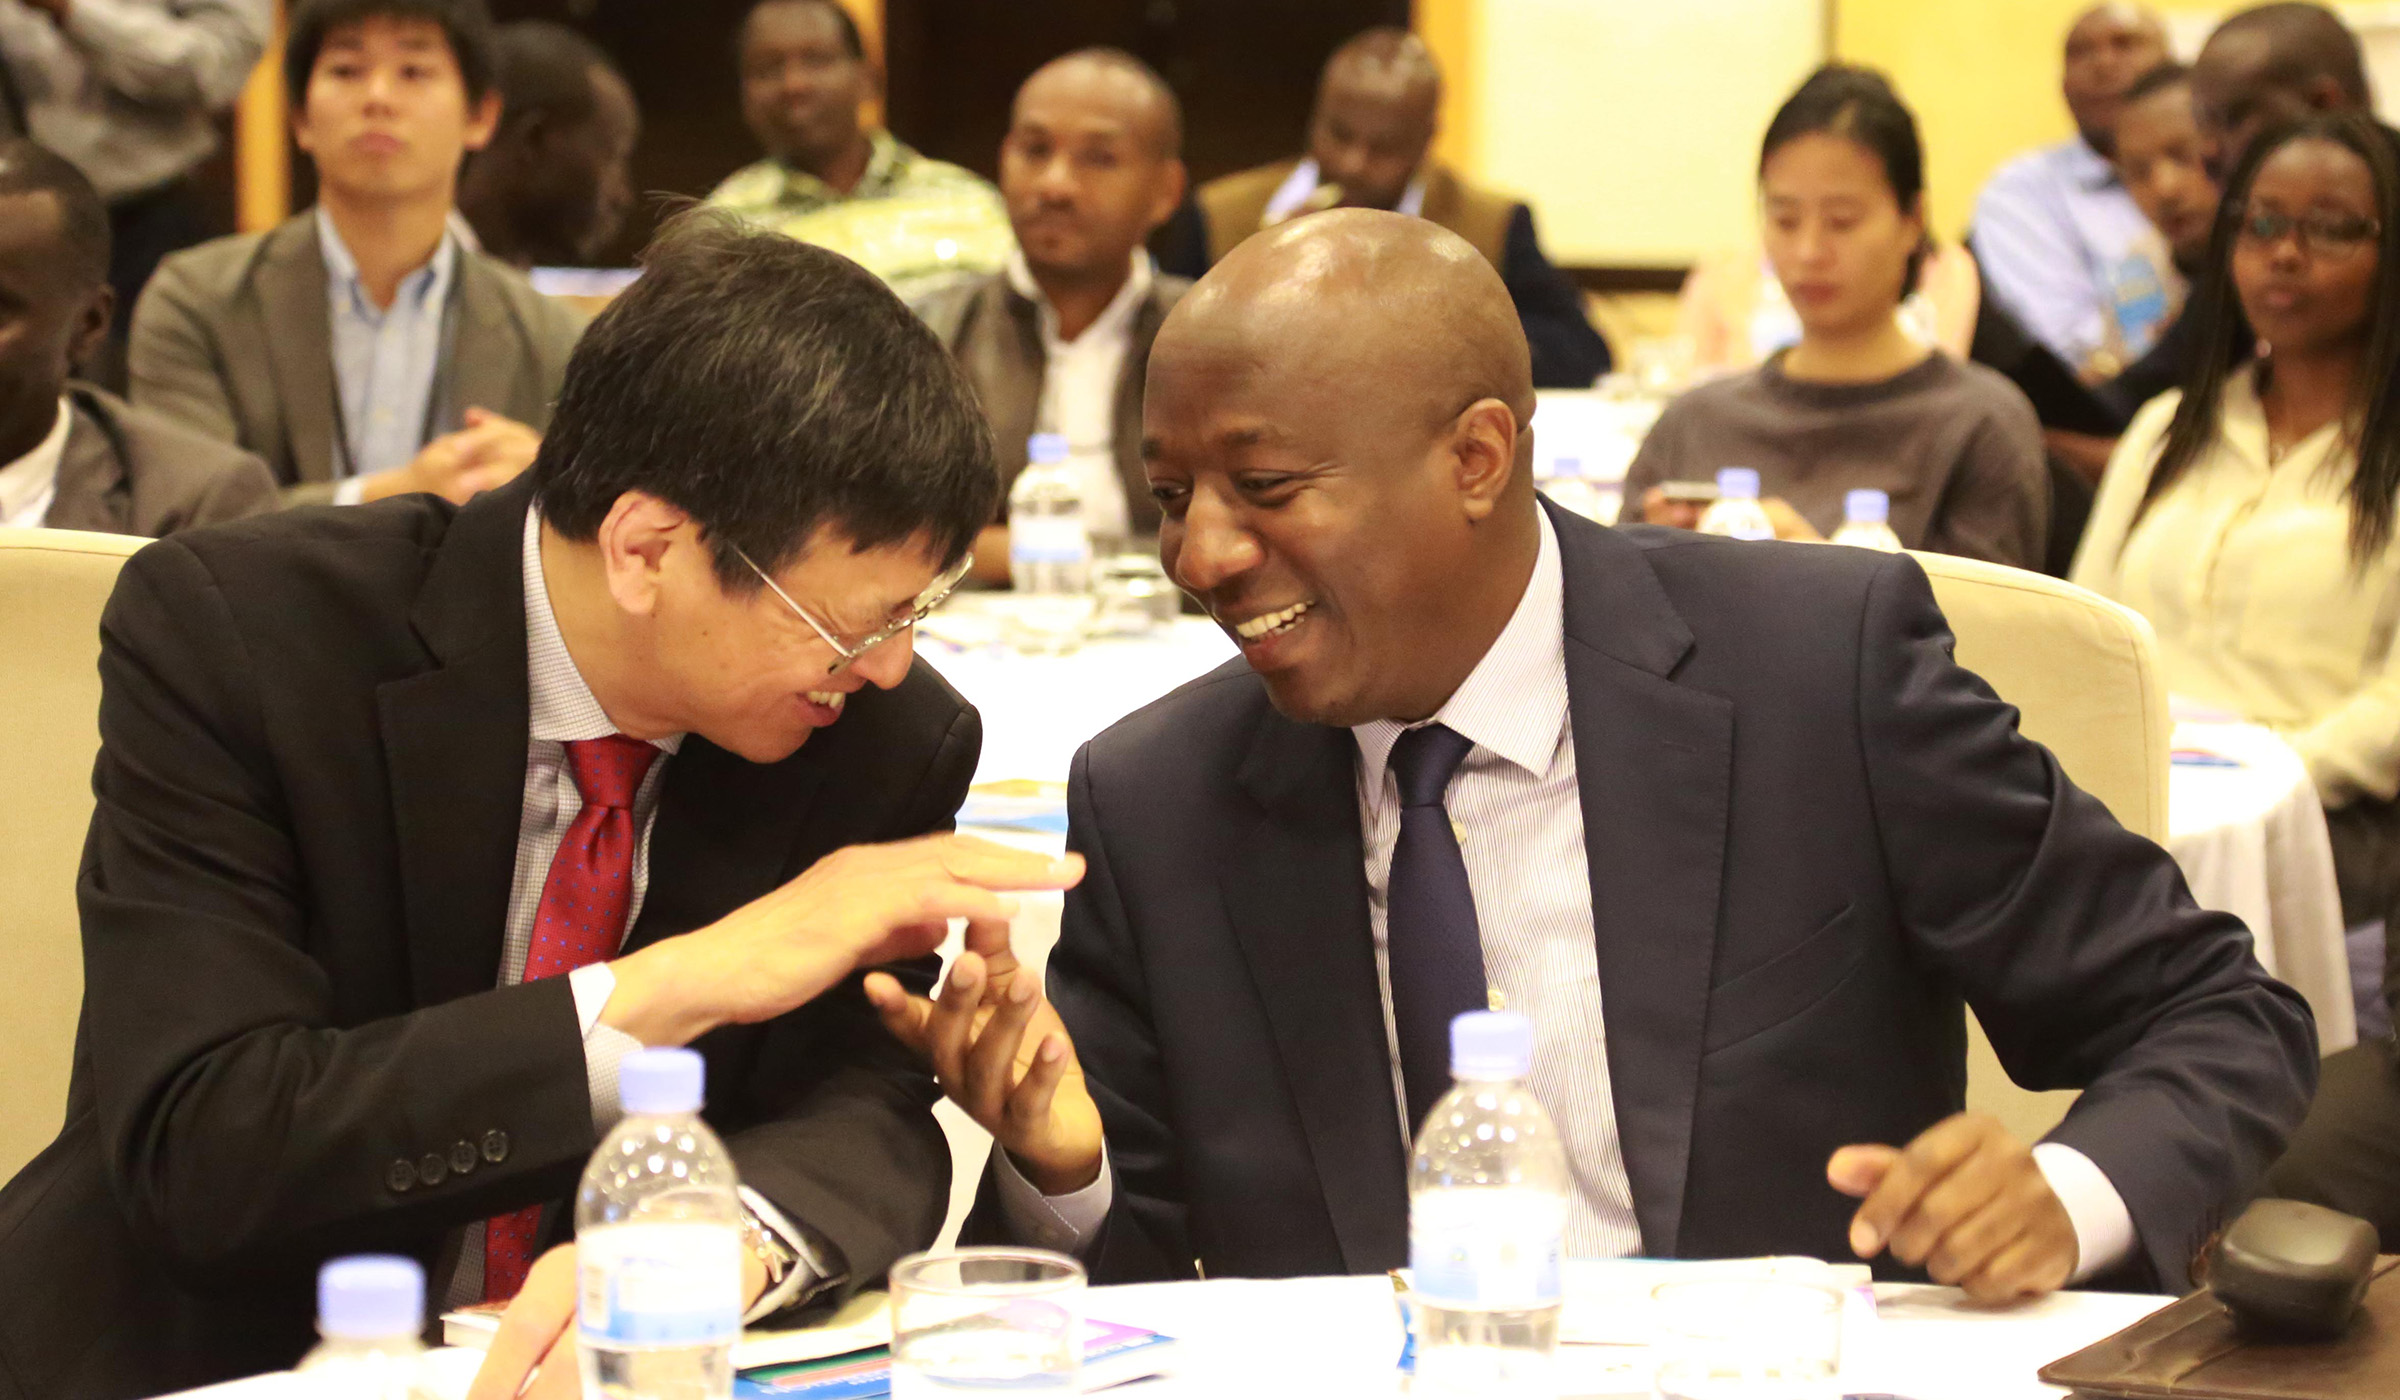 Prime Minister Edouard Ngirente interacts with  Shenggen Fan, Director General of the International Food Policy Research Institute (IFPRI), during the official launch of  the 2019 Global Food Policy Report in Kigali yesterday. The report recommends that governments increase financial and policy support to rural communities in order to address the problem of a big number of the worldu2019s poor and malnourished people living in rural areas and dependent on the agriculture for food and livelihoods. Sam Ngendahimana.